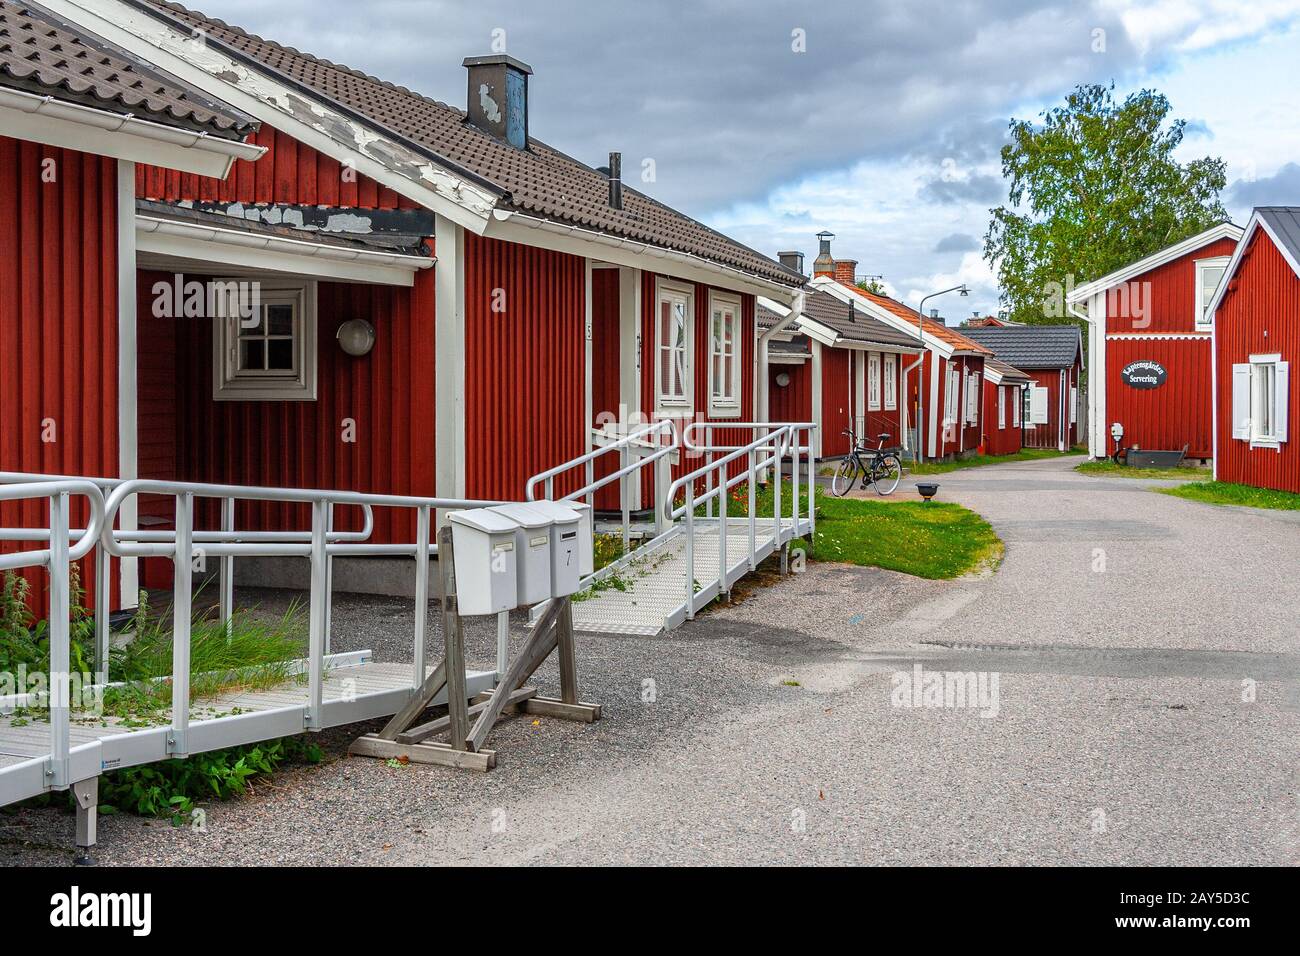 Old Church Town. Gammelstad Sweden. Stock Photo